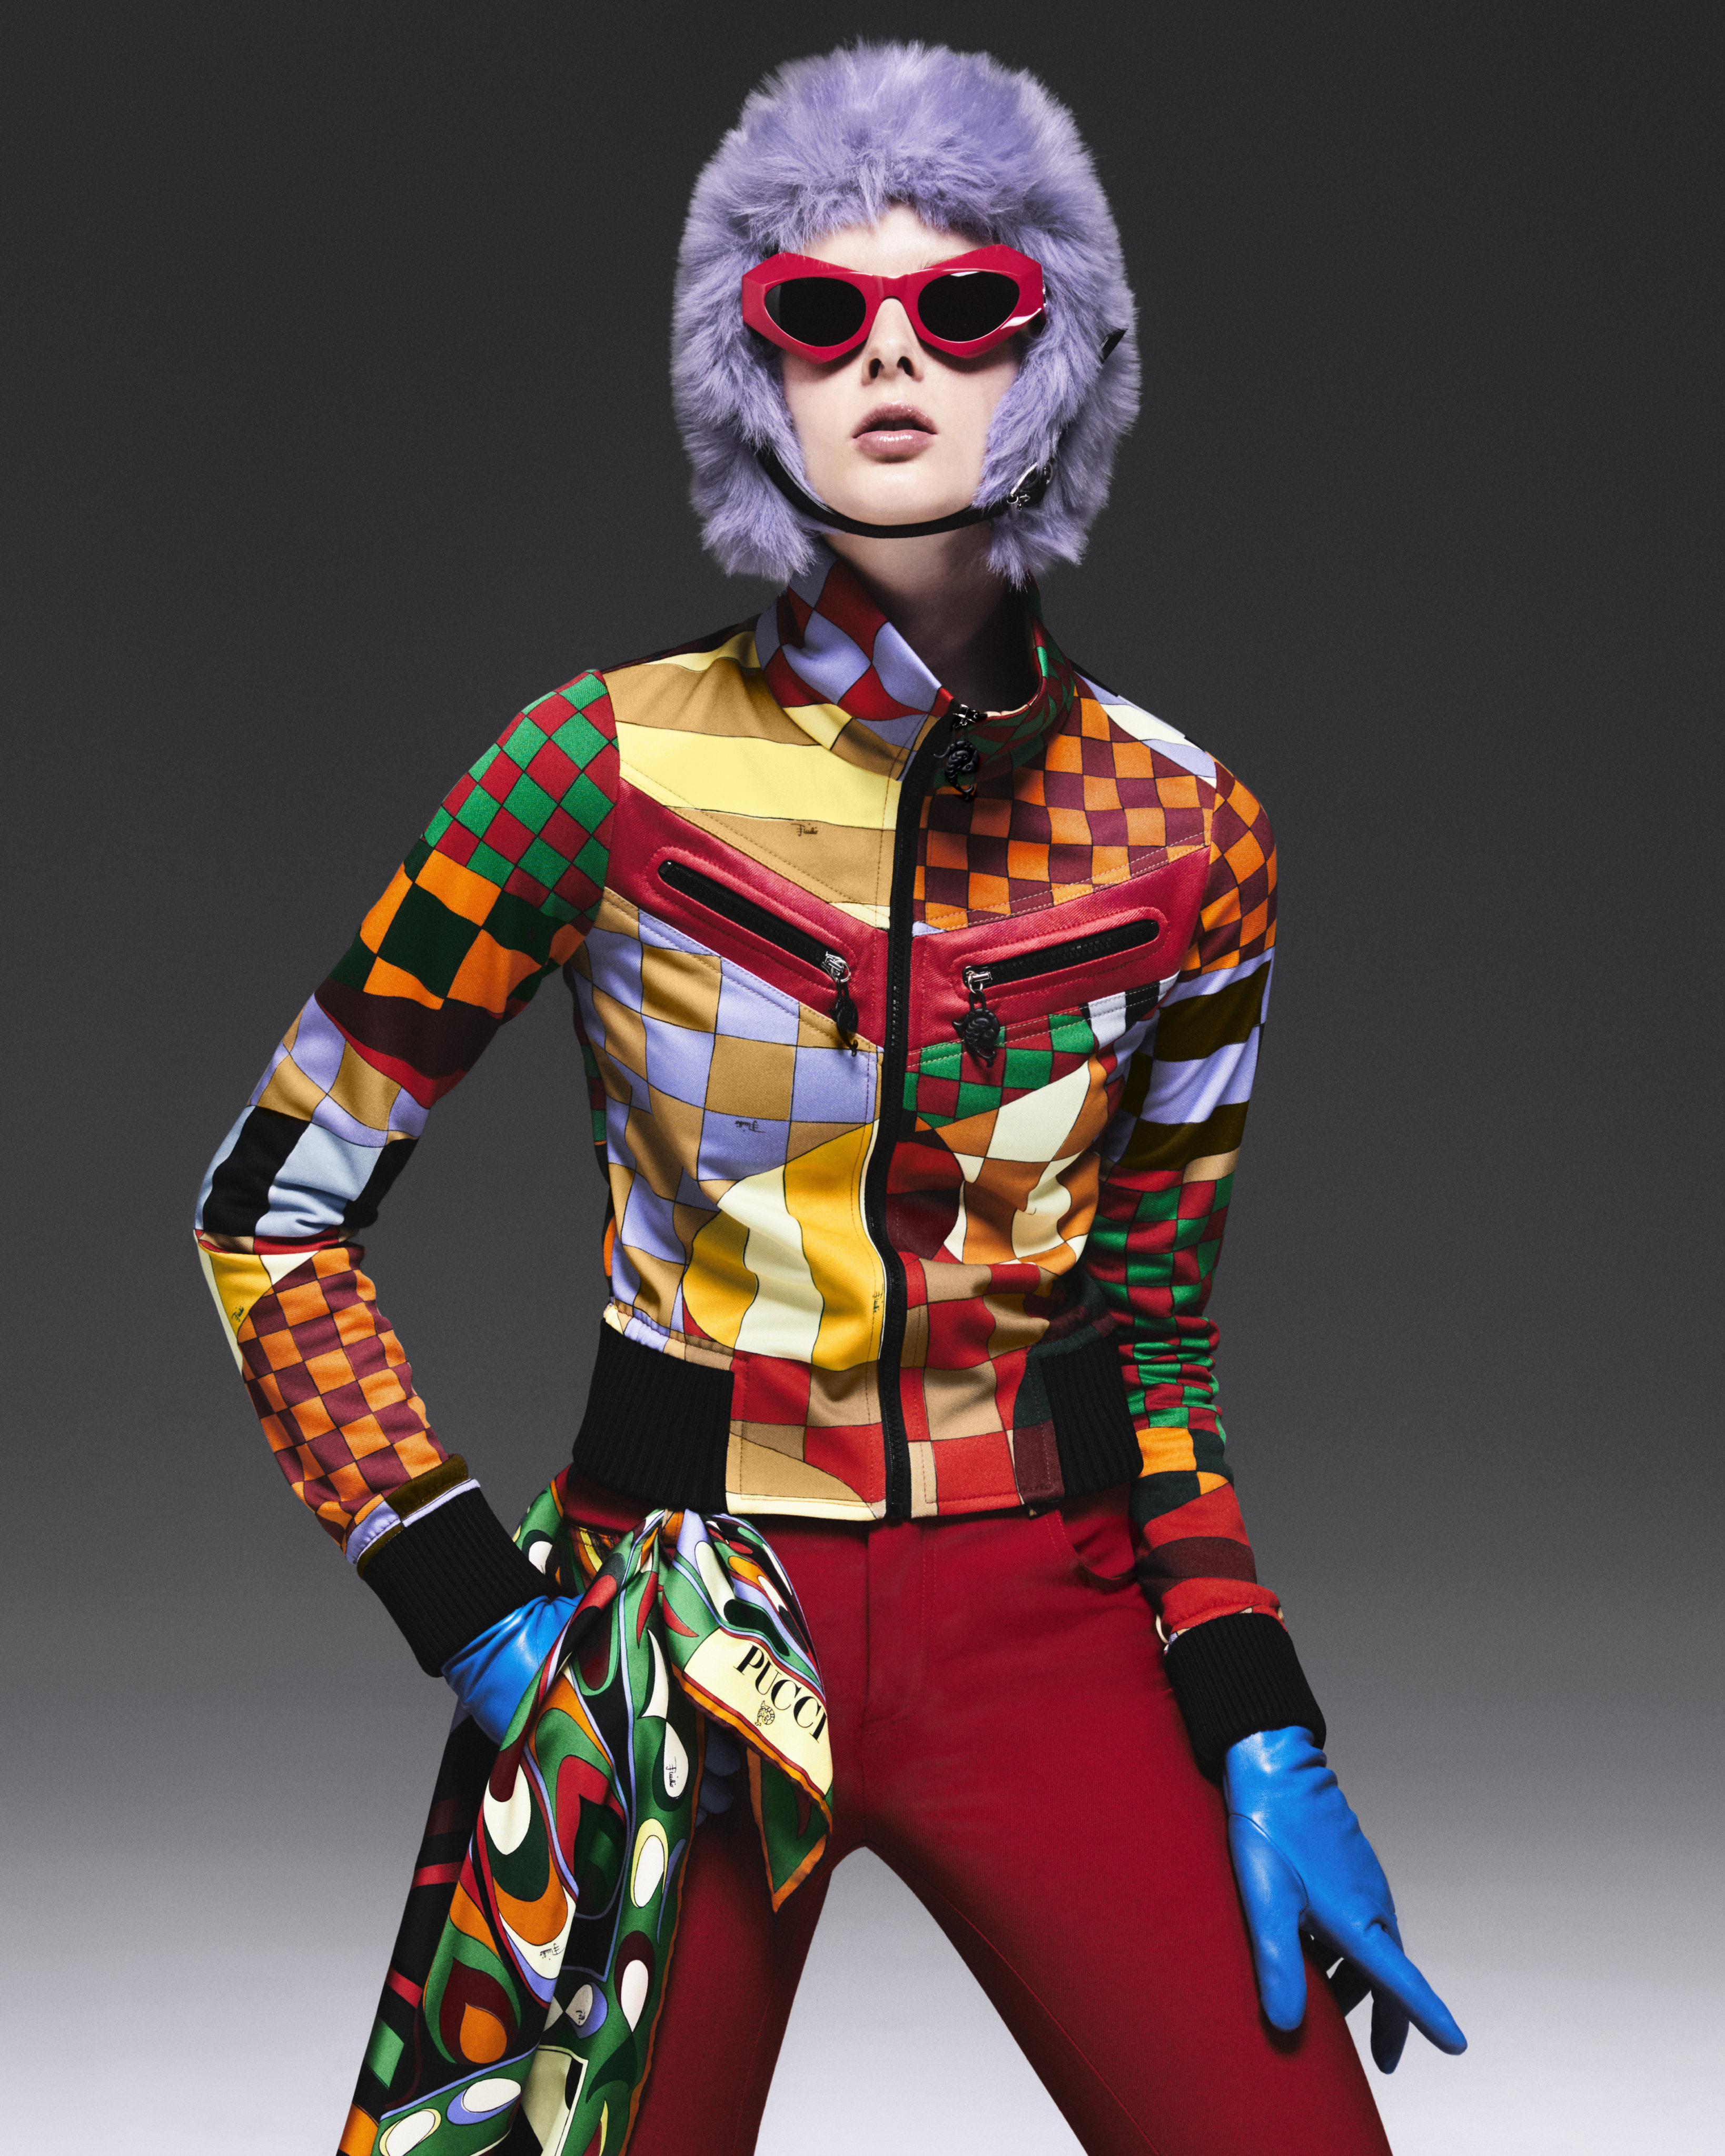 Have an event and want to stand out? Here are five high fashion items – including Pucci’s eye-popping new designs – to give your look a lift whatever the occasion. Photo: Handout